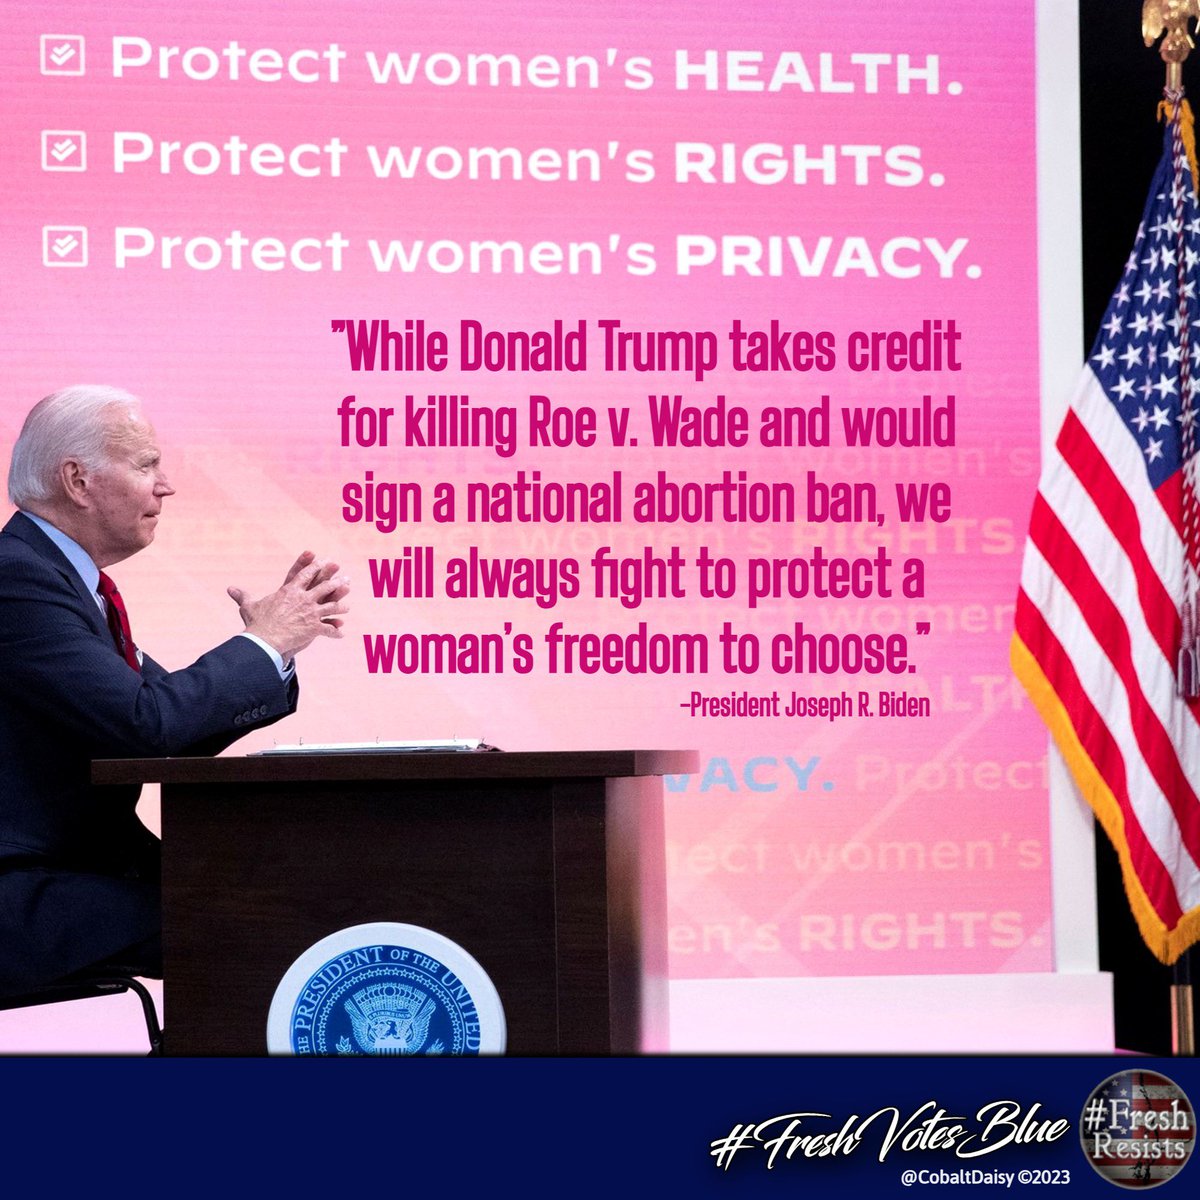 Real men respect women, their bodies, their choices, and their Civil Rights. 

While the Republican front runner, Donald Trump brags that Roe v. Wade was struck down because of him, Joe Biden “will always fight to protect a woman’s freedom to choose.”
#FreshStrong
#JustVoteBlue🇺🇸